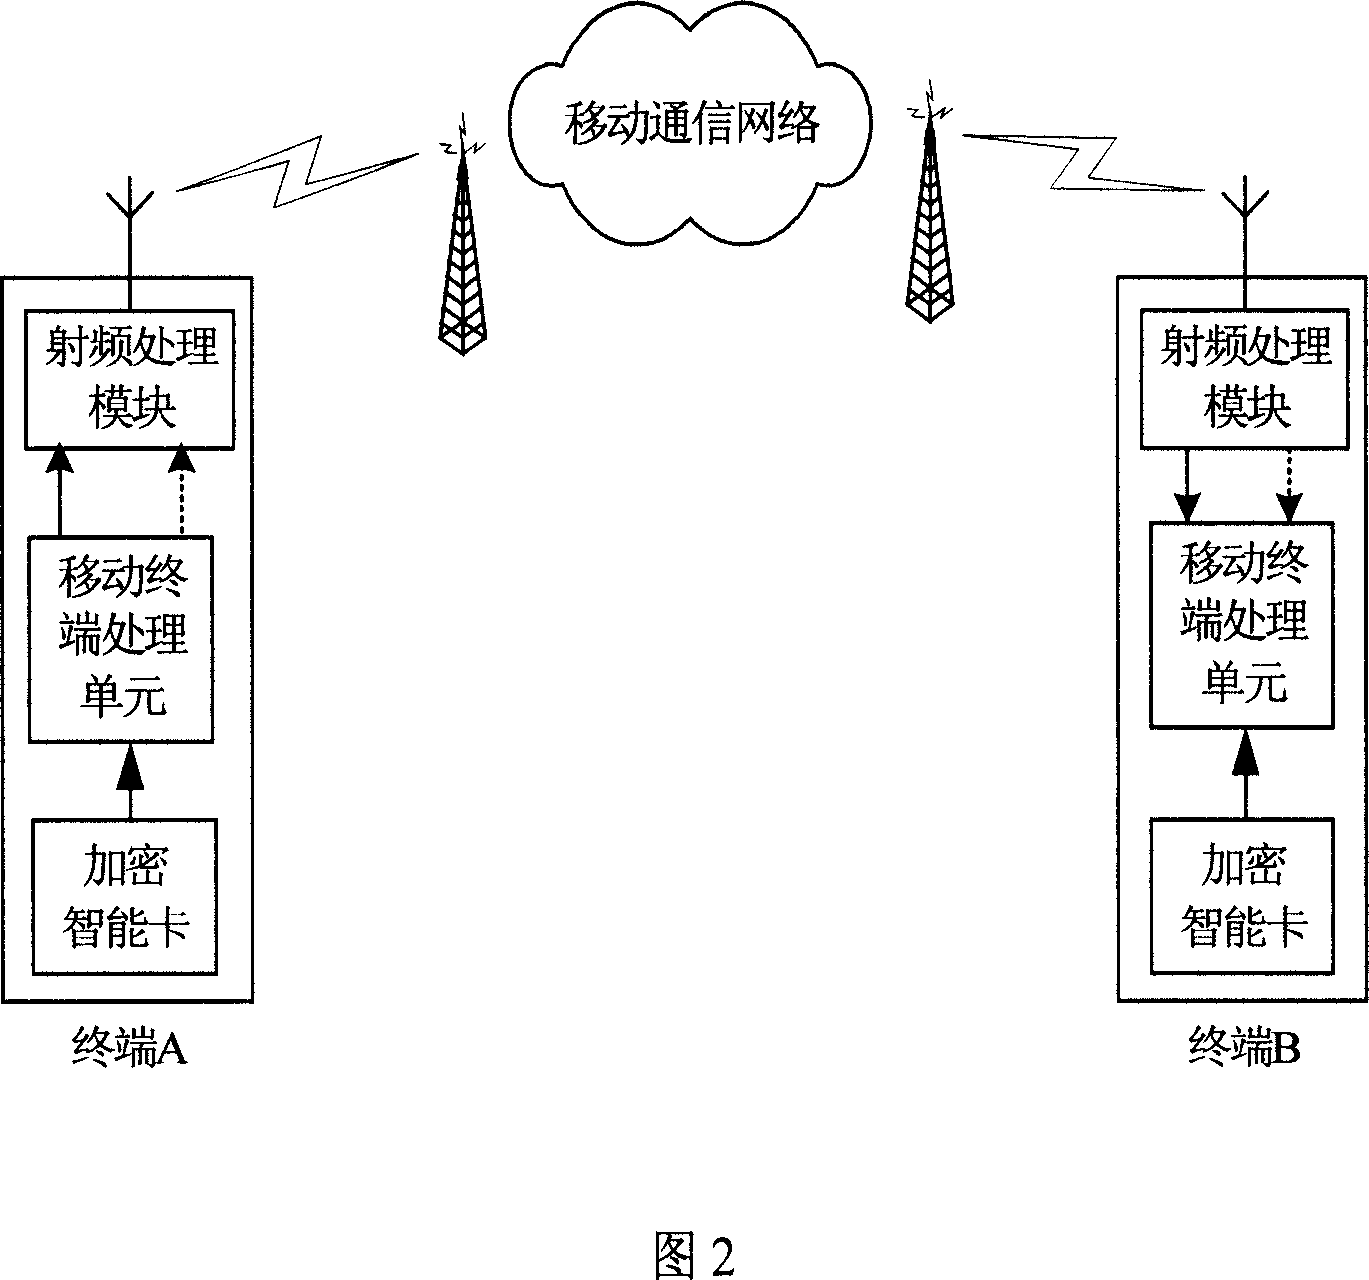 End-to-end encrypting method and system based on mobile communication network